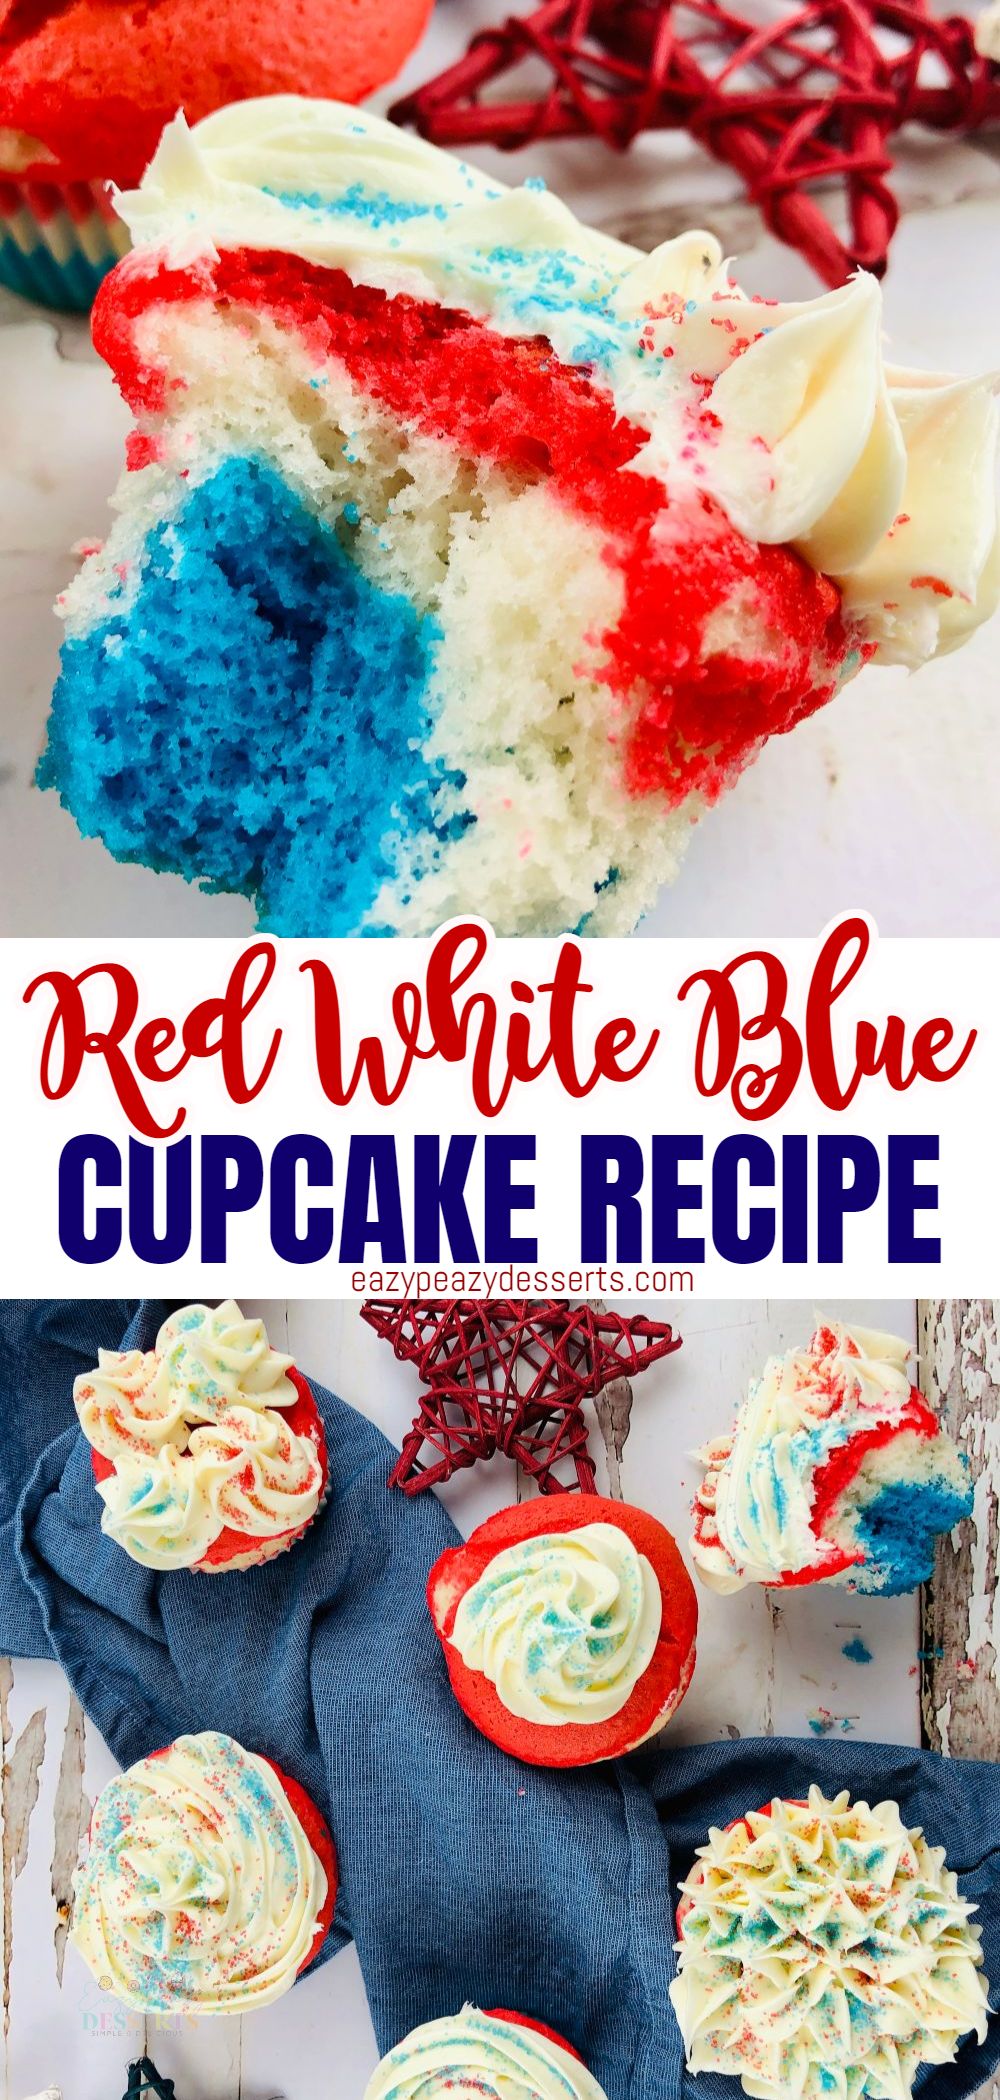 Red white and blue cupcakes